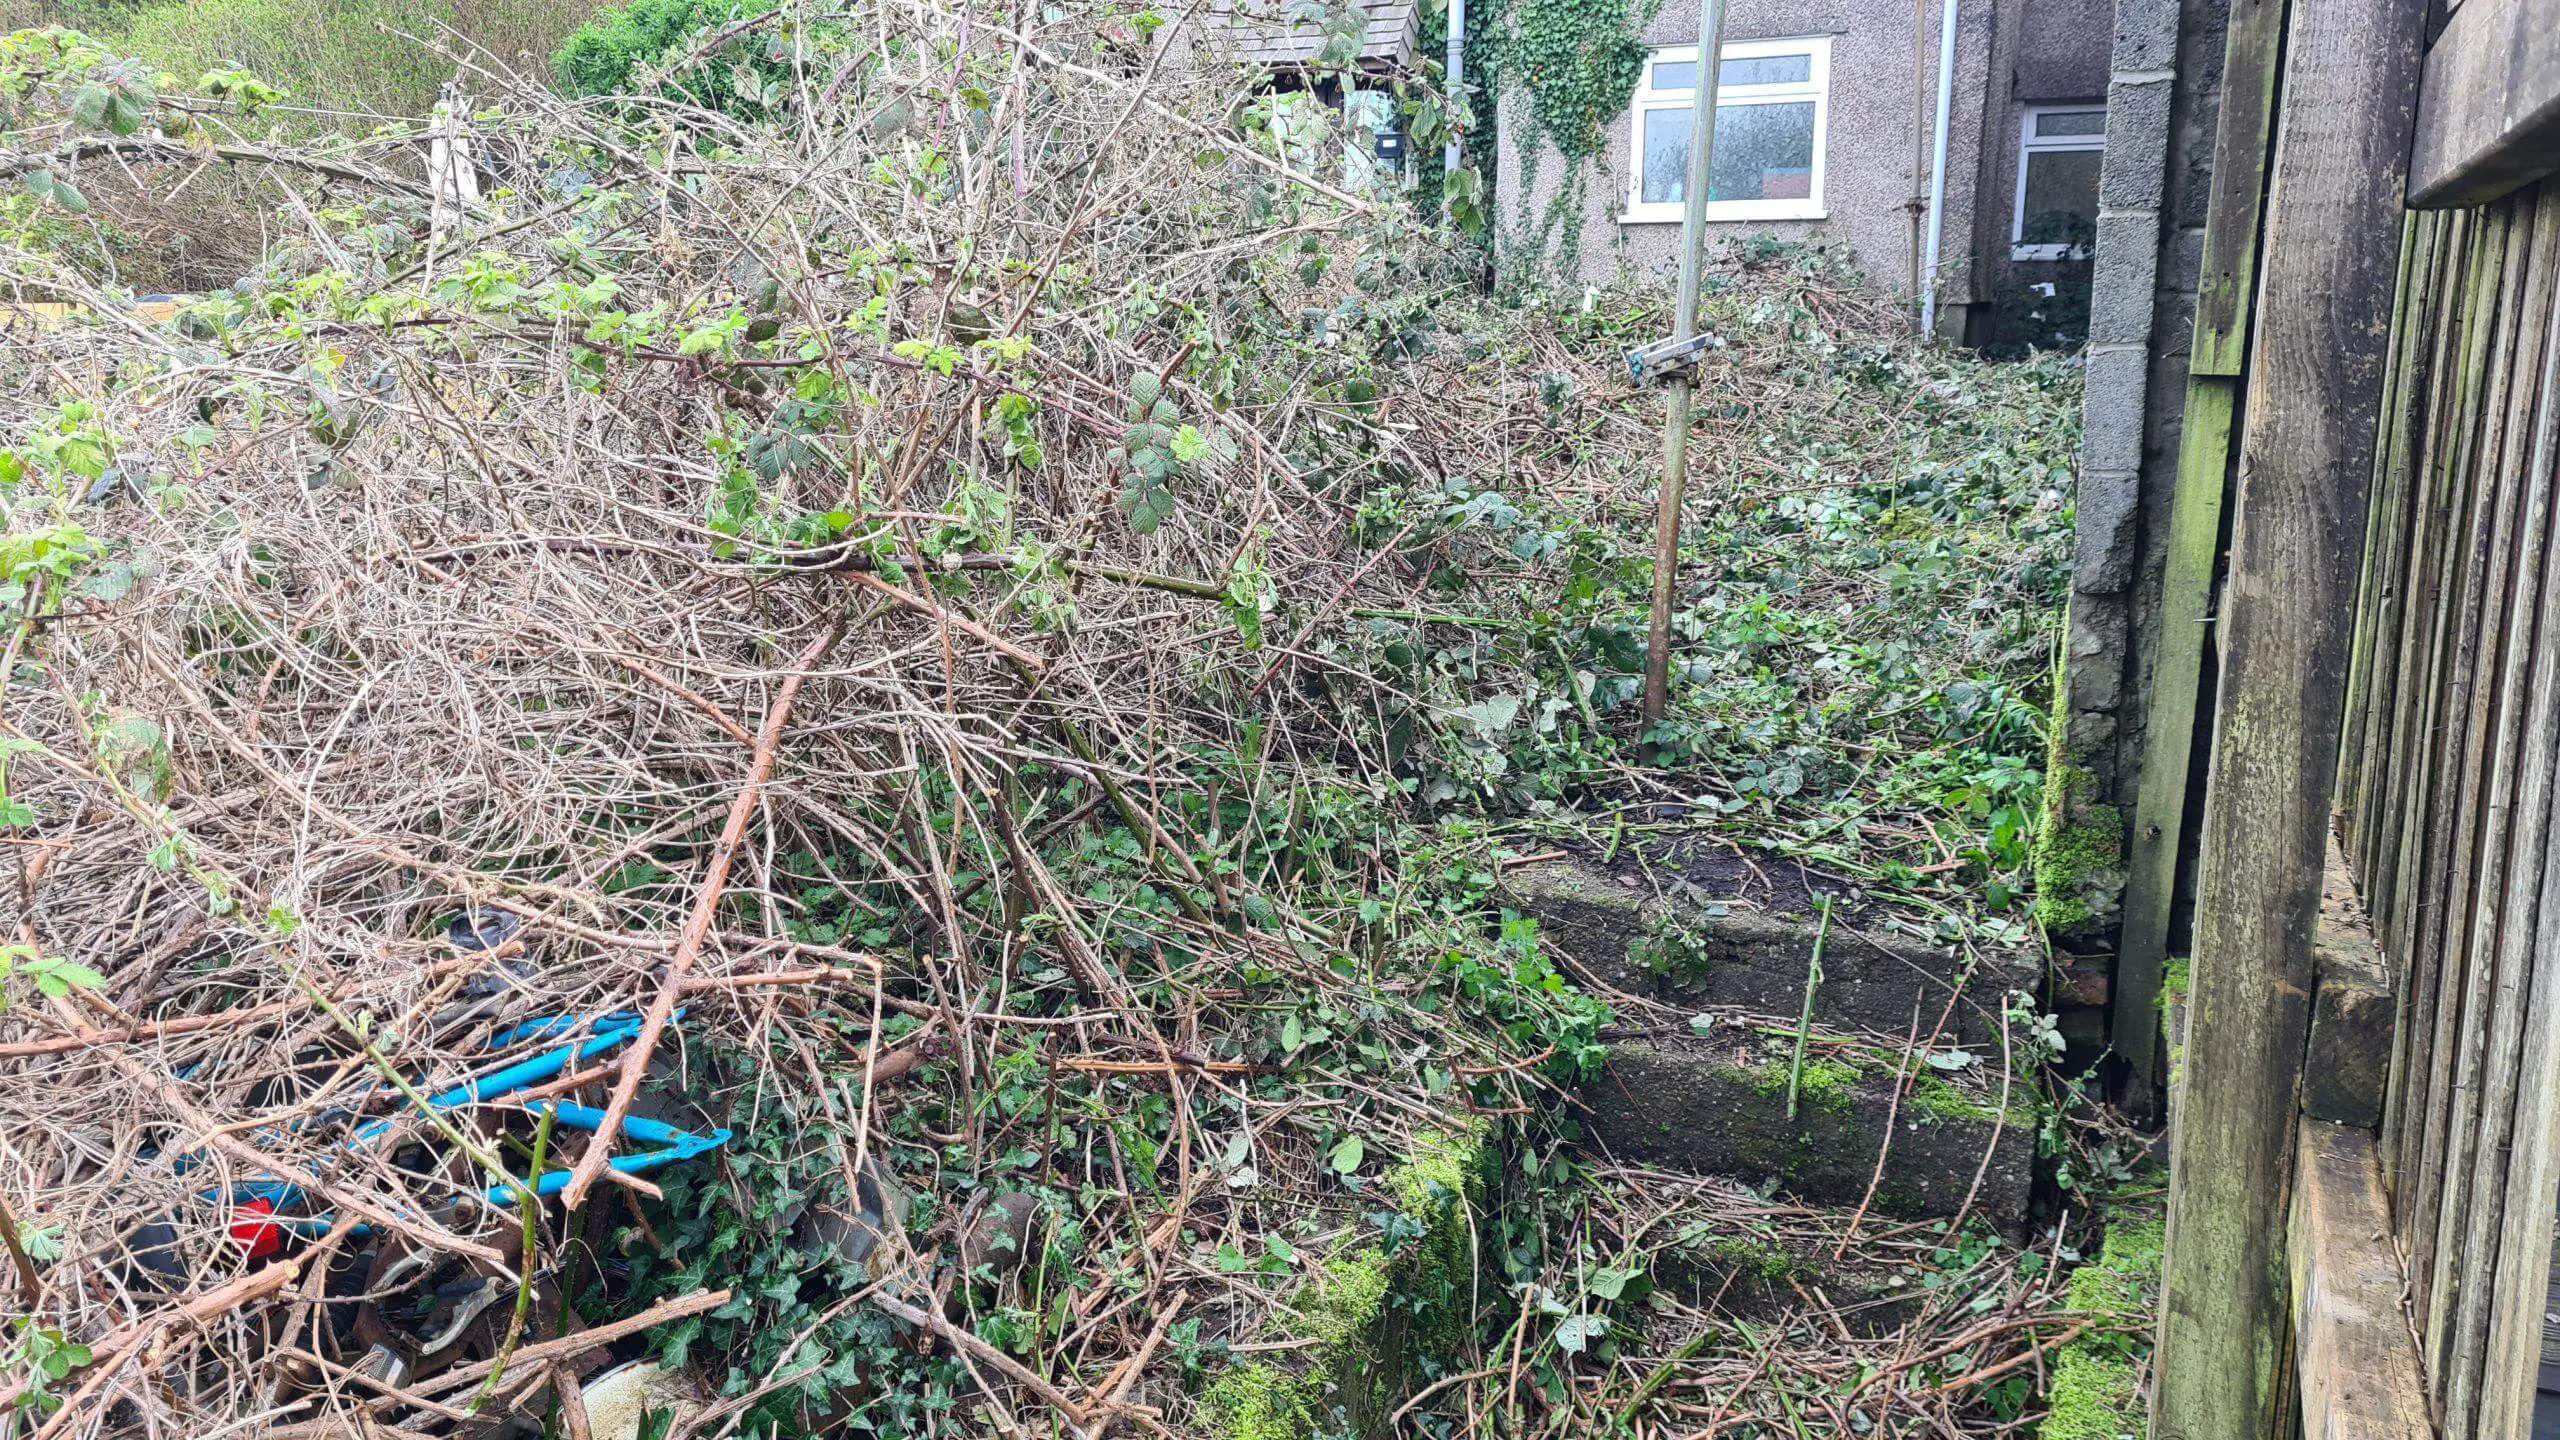 Some invasive weeds such as brambles consume a large area and pose a risk to native plants as well as danger of hurting yourself